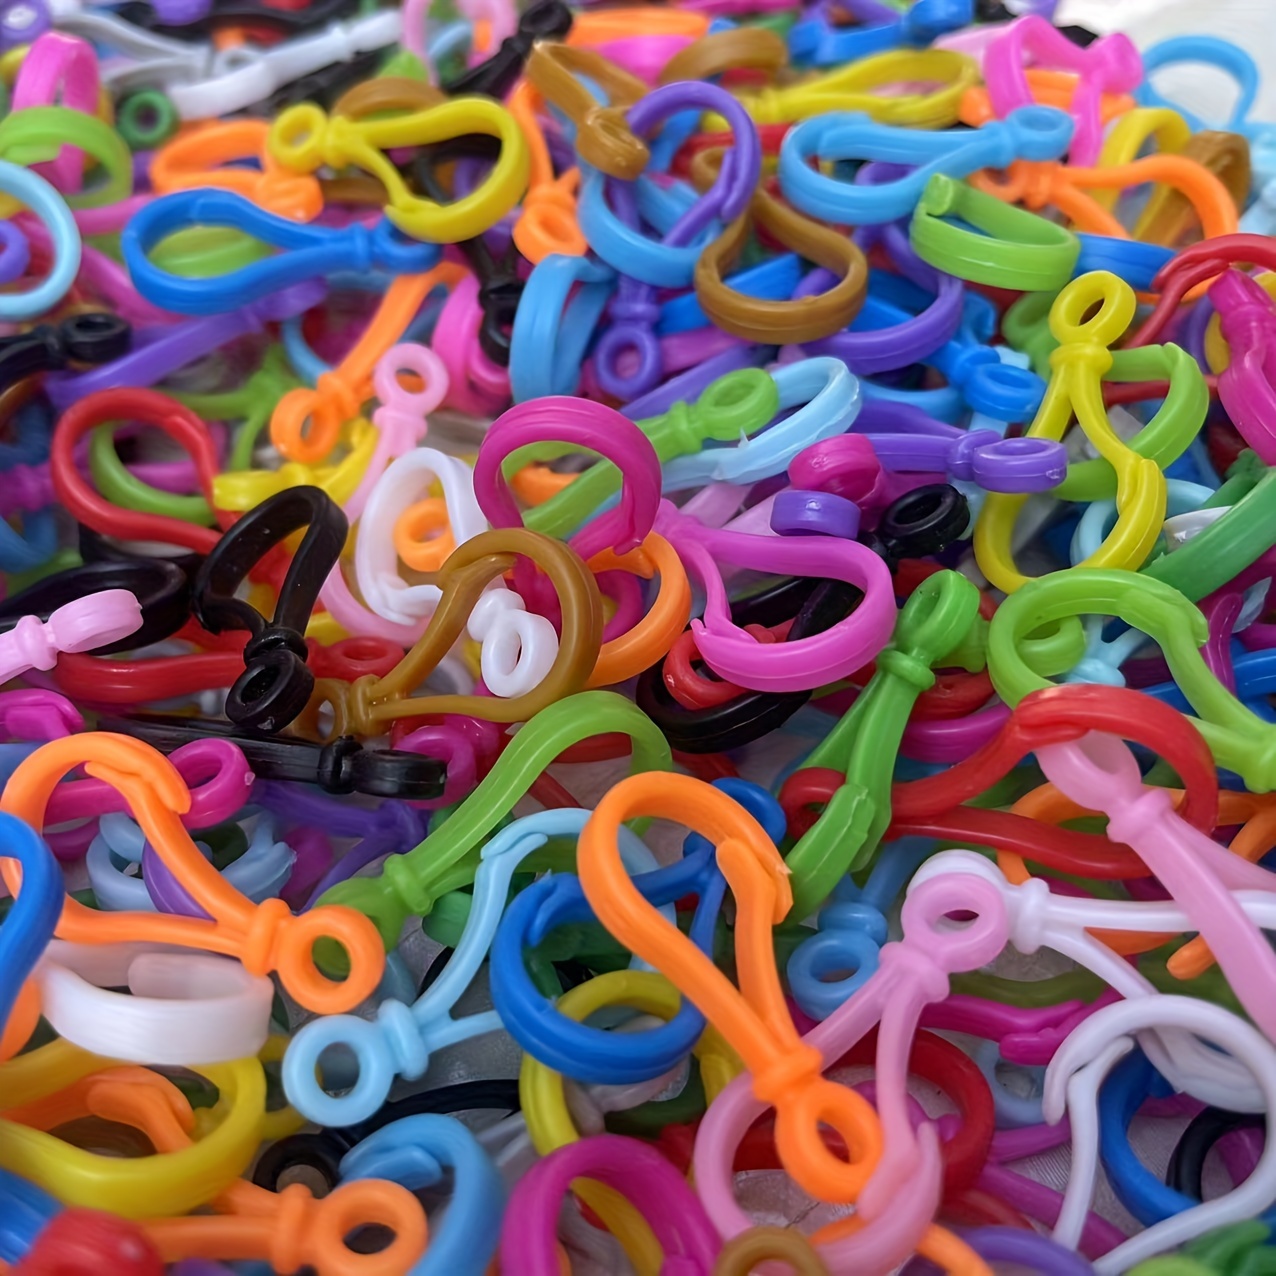 EORTA 100 Pcs 35 mm Plastic Lobster Claw Clasps Hard Plastic Lobster Clasp  Hook Lanyard Snap Clips for DIY, Crafts, Handmade, Key Chain, Toy